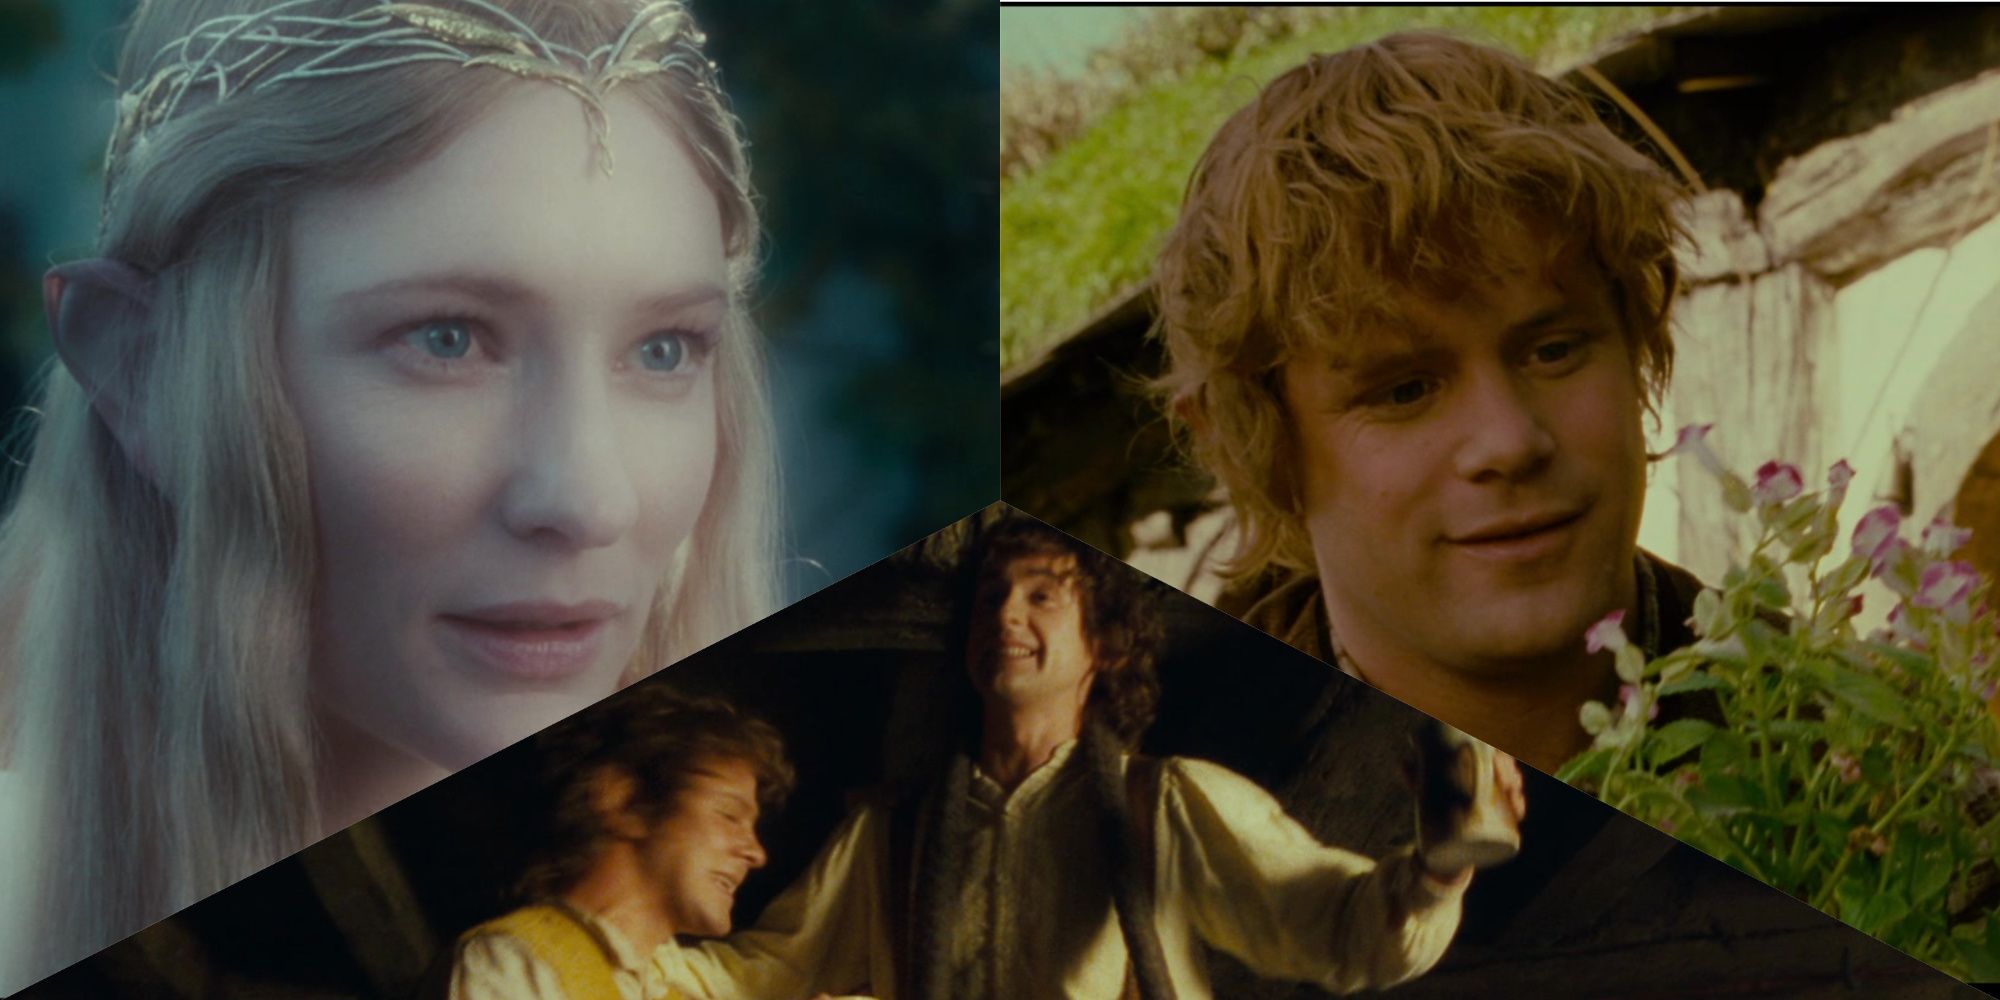 3-Split image with Galadriel, Merry and Pippin, and Sam